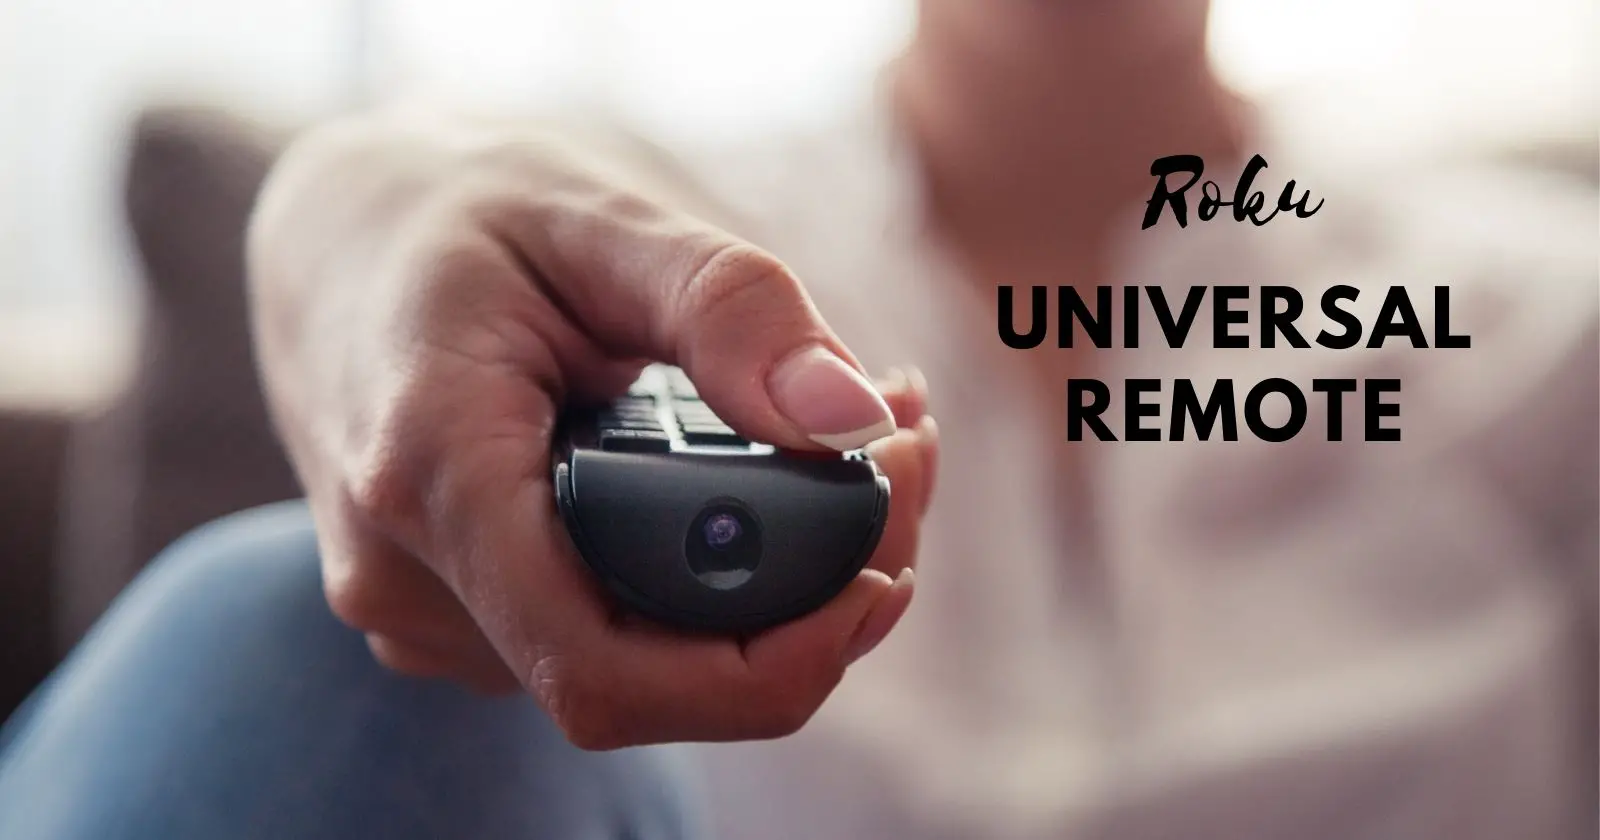 Man Pointing remote with a text "Roku Universal Remote"